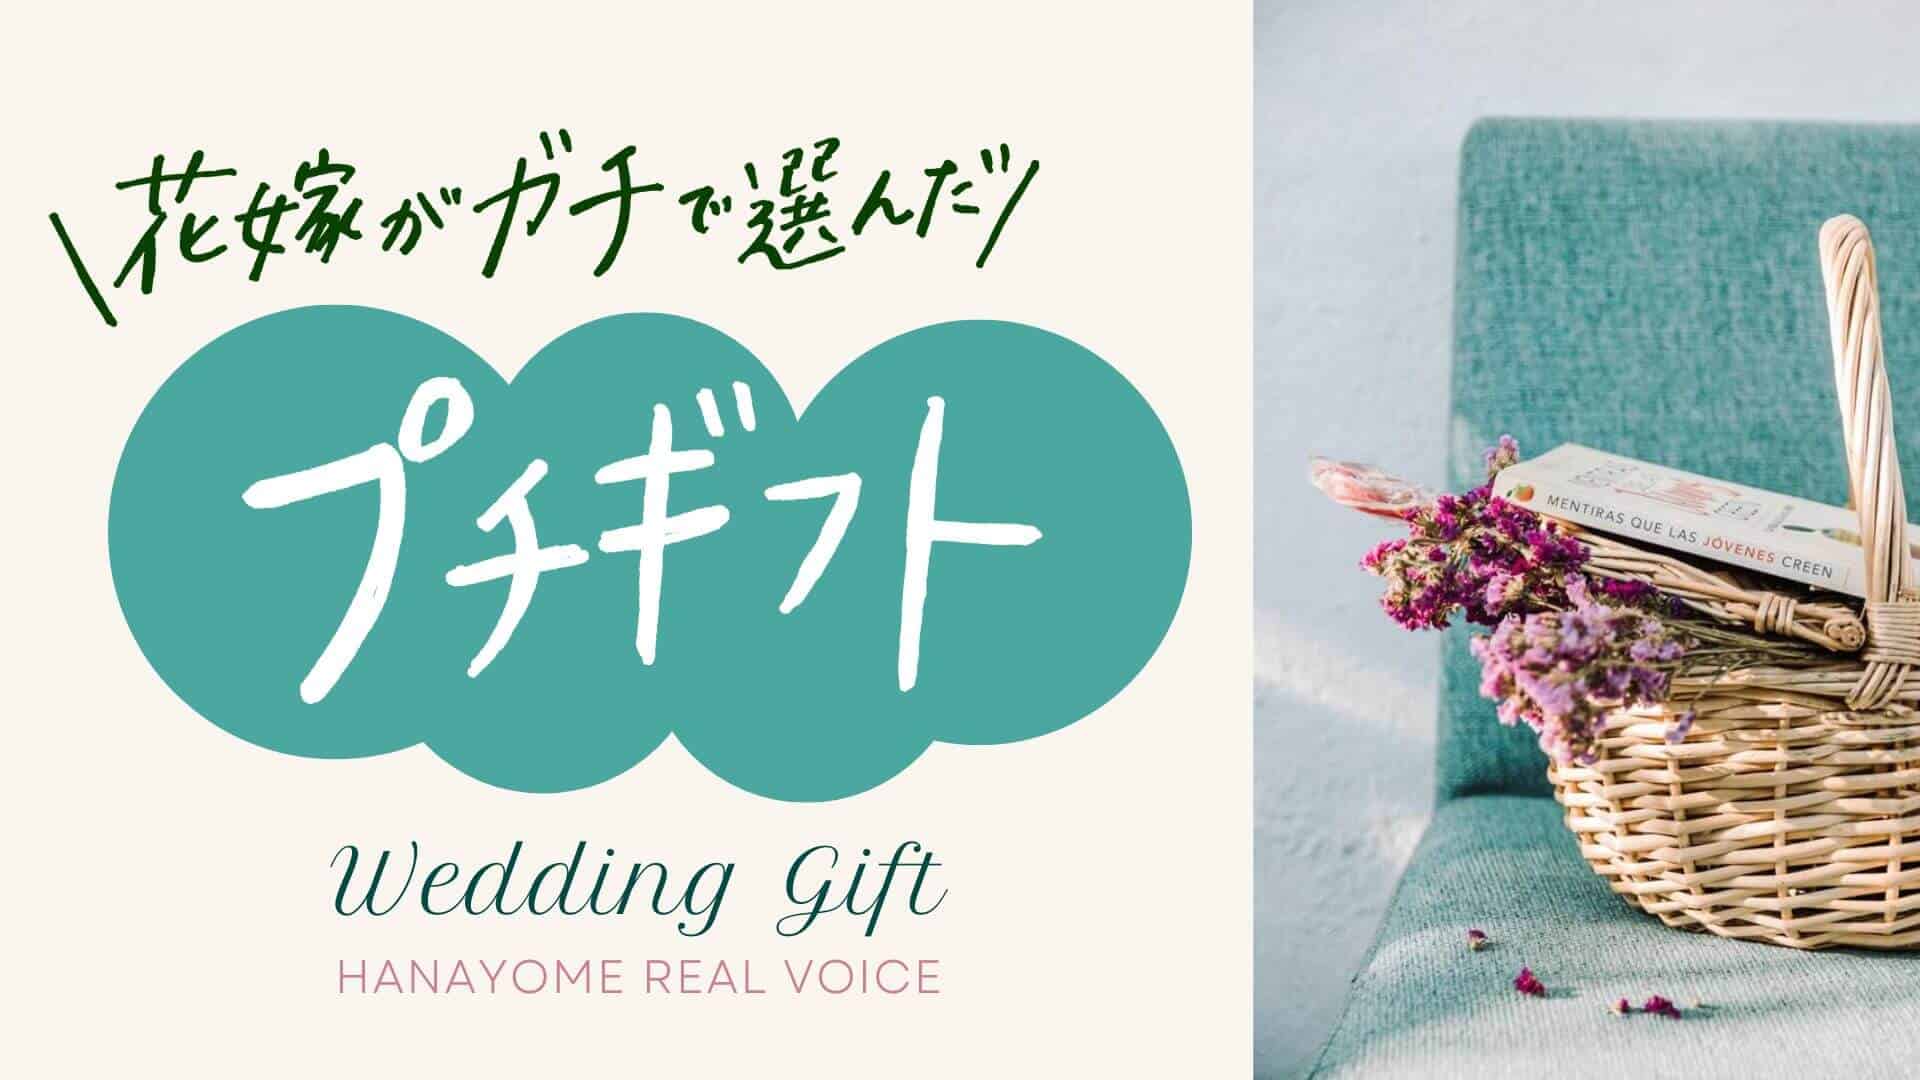 Recommended small gifts for weddings! bride's real voice